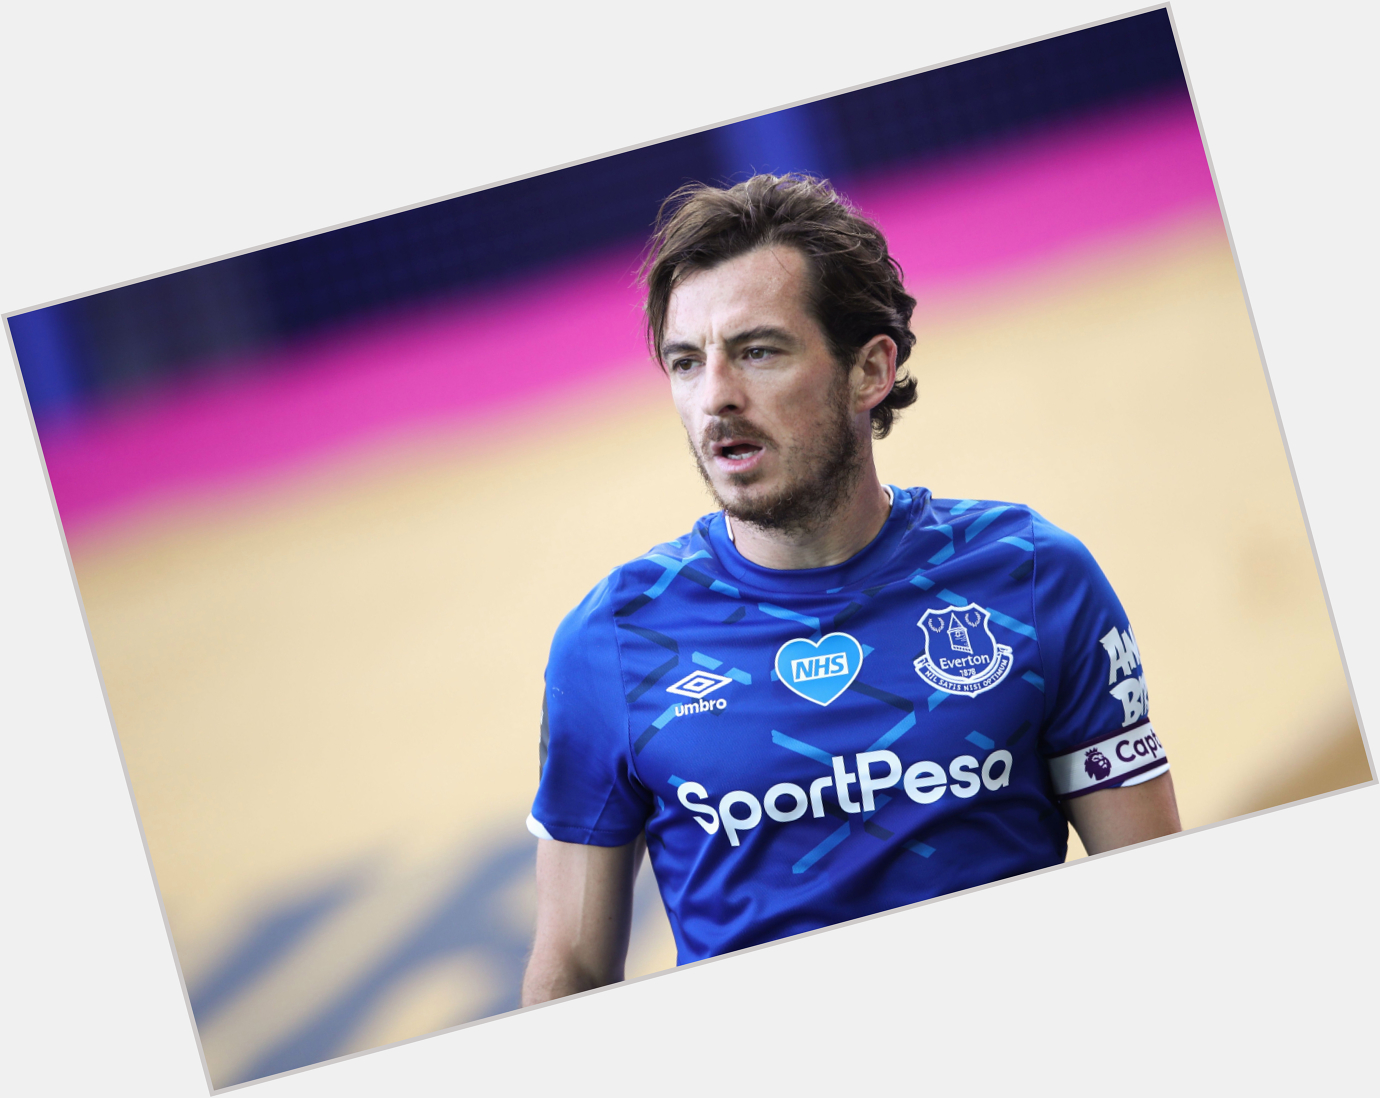 Wishing former Everton hero Leighton Baines a very happy 36th birthday today.

What a player he was... 